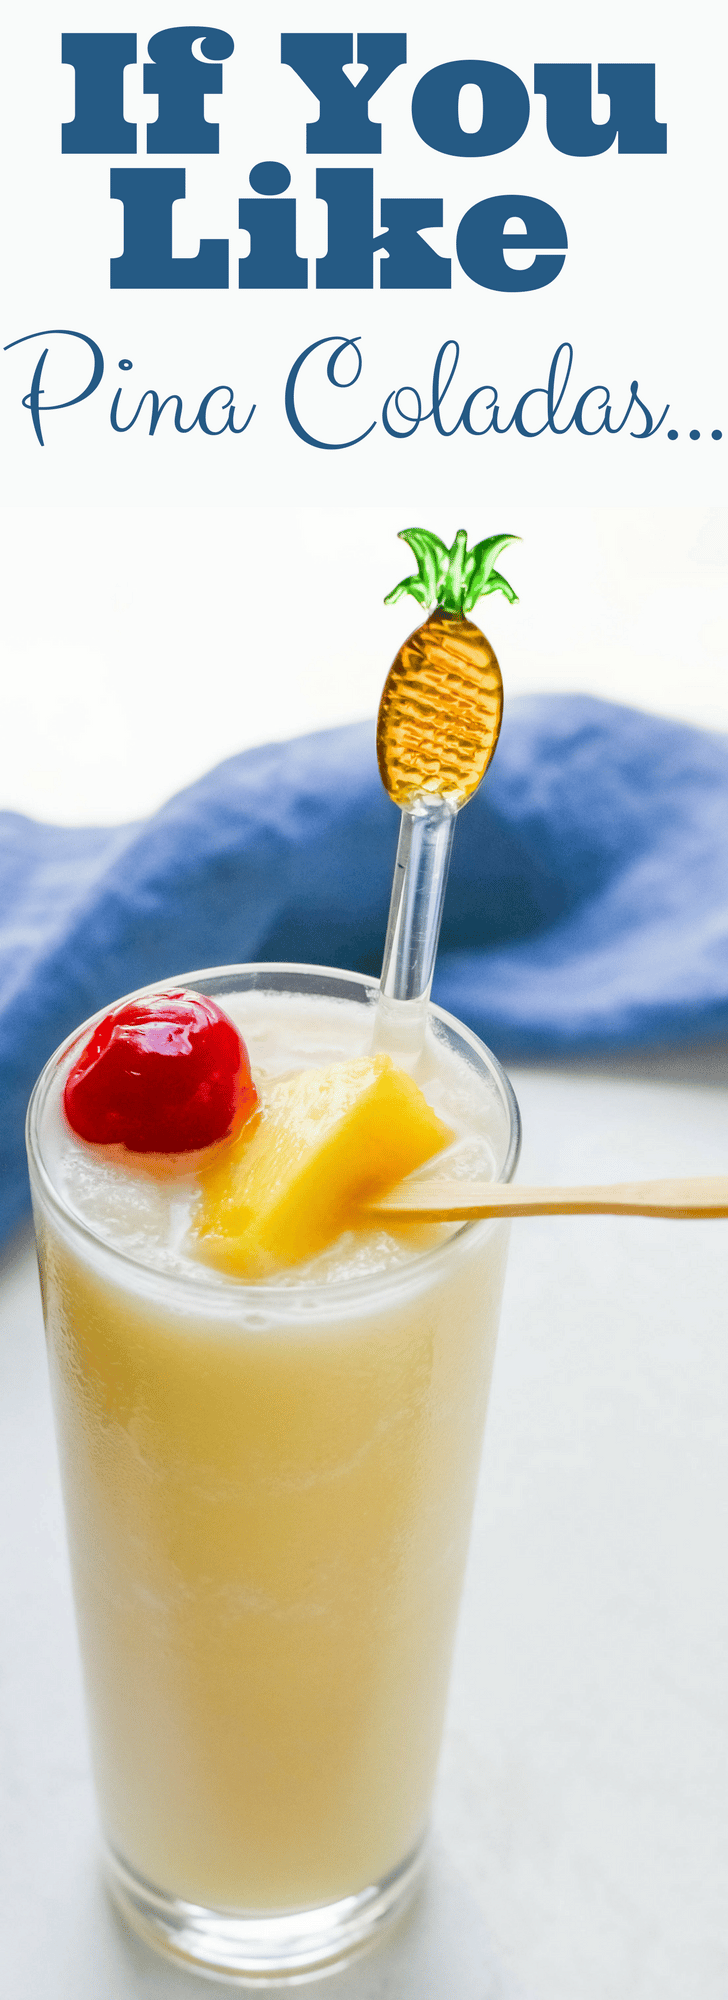 If You Like Pina Coladas... and who doesn't? This classic pina colada recipe is everything you want in an icy tropical drink! Don't forget the garnish!